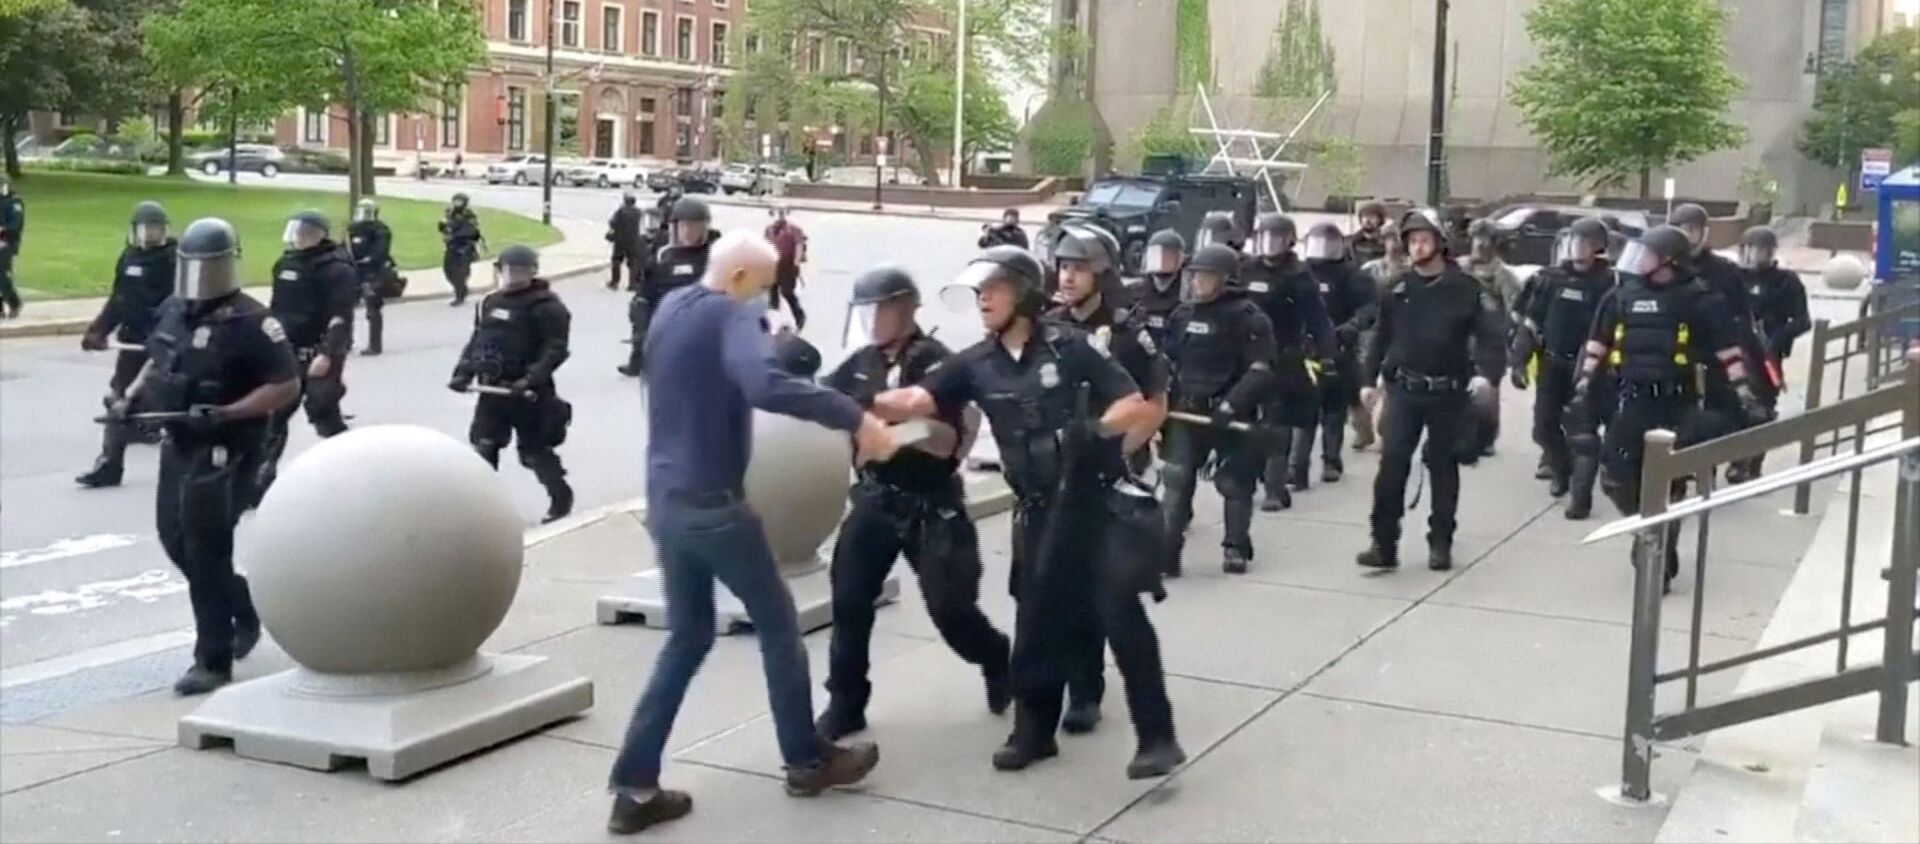 An elderly man appears to be shoved by riot police during a protest against the death in Minneapolis police custody of George Floyd, in Buffalo, New York, U.S. June 4, 2020 in this still image taken from video - Sputnik International, 1920, 10.06.2020